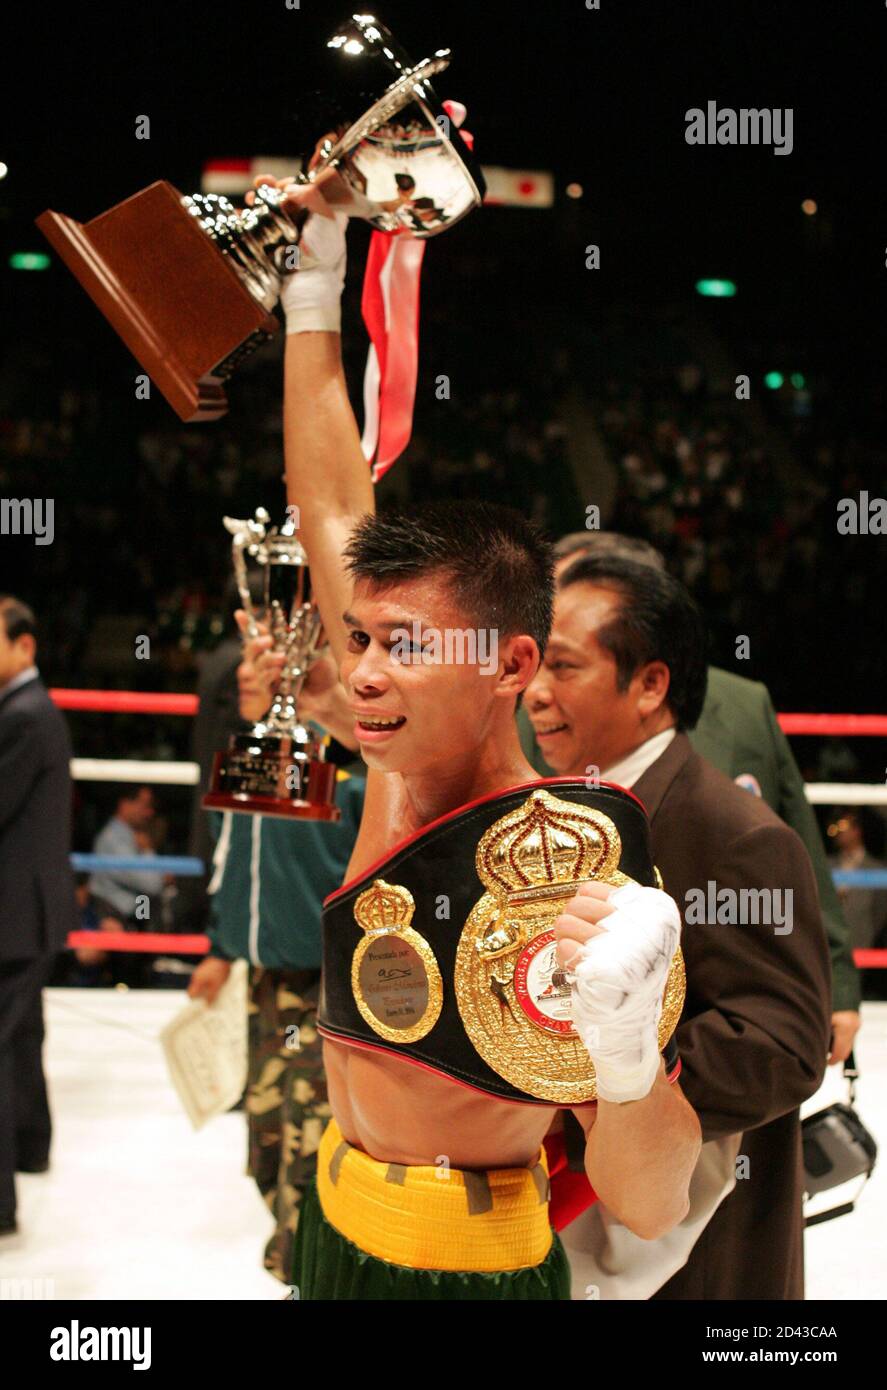 WBA FEATHERWEIGHT CHAMPION INDONESIA'S CELEBRATES AFTER WINNING THE TITLE BOUT AGAINST JAPANESE CHALLENGER SATO IN TOKYO. World Boxing Association (WBA) featherweight champion Indonesia's Chris John celebrates as he raises his winning